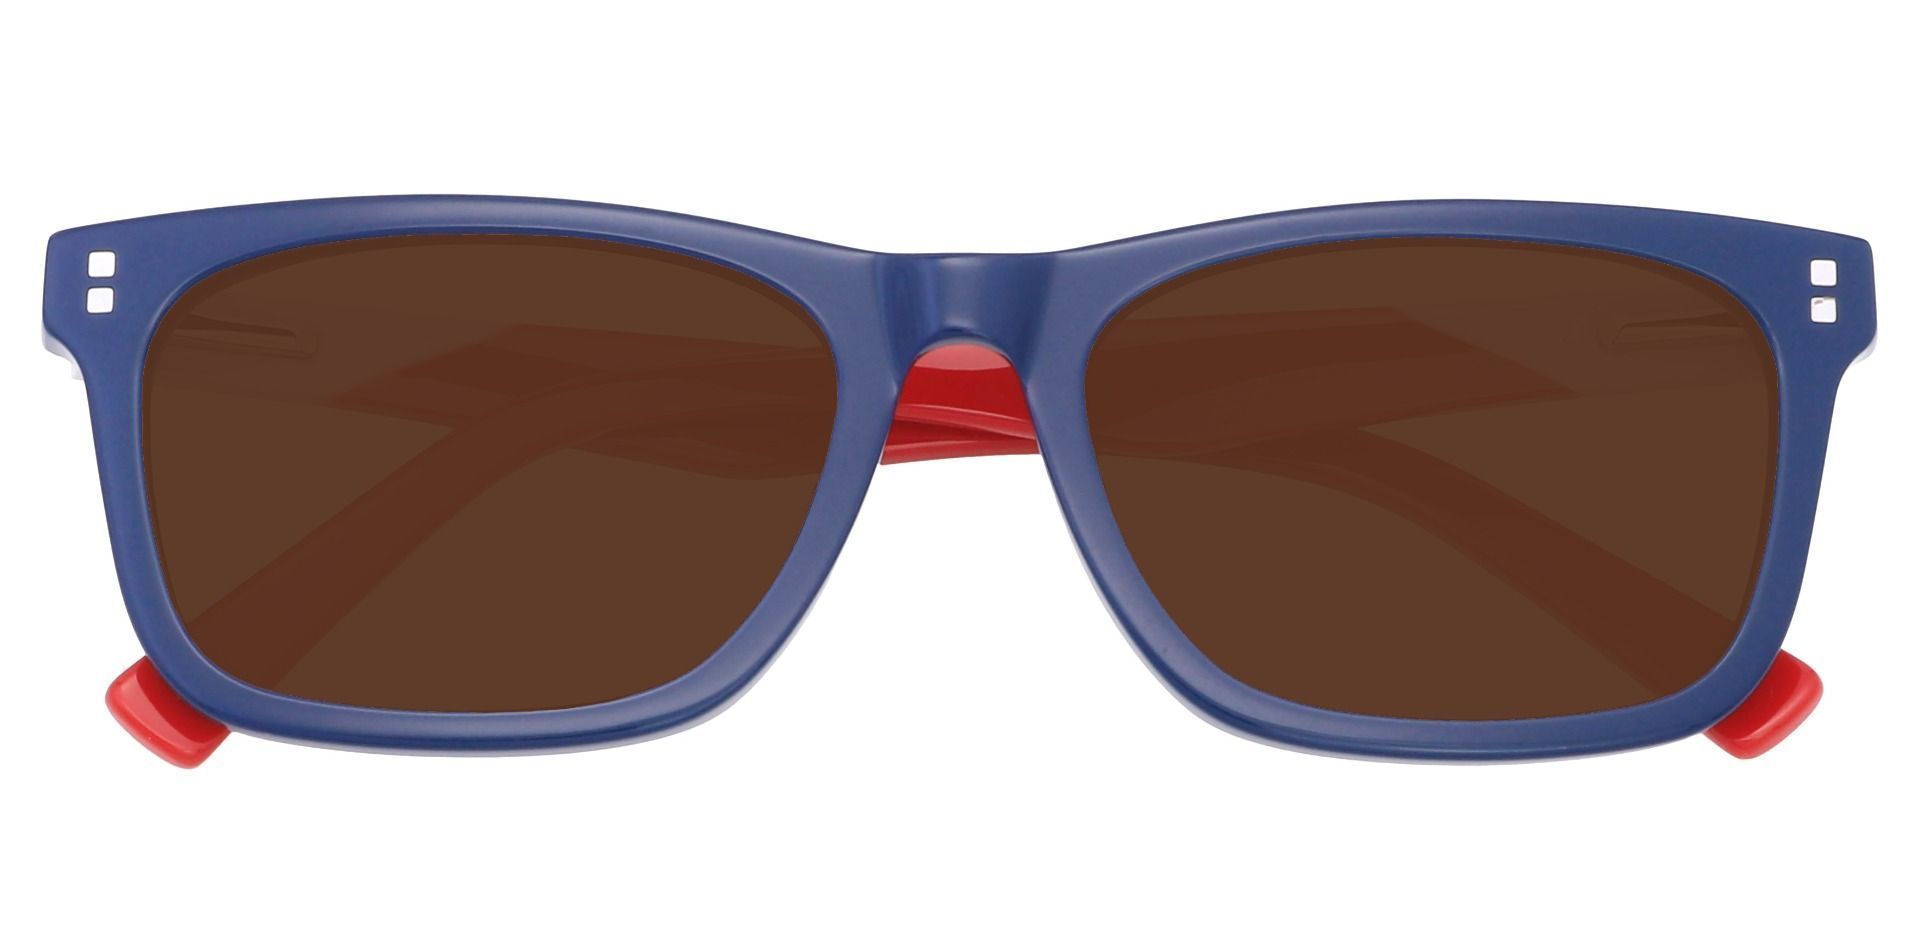 Newbury Rectangle Non-Rx Sunglasses - Blue Frame With Brown Lenses